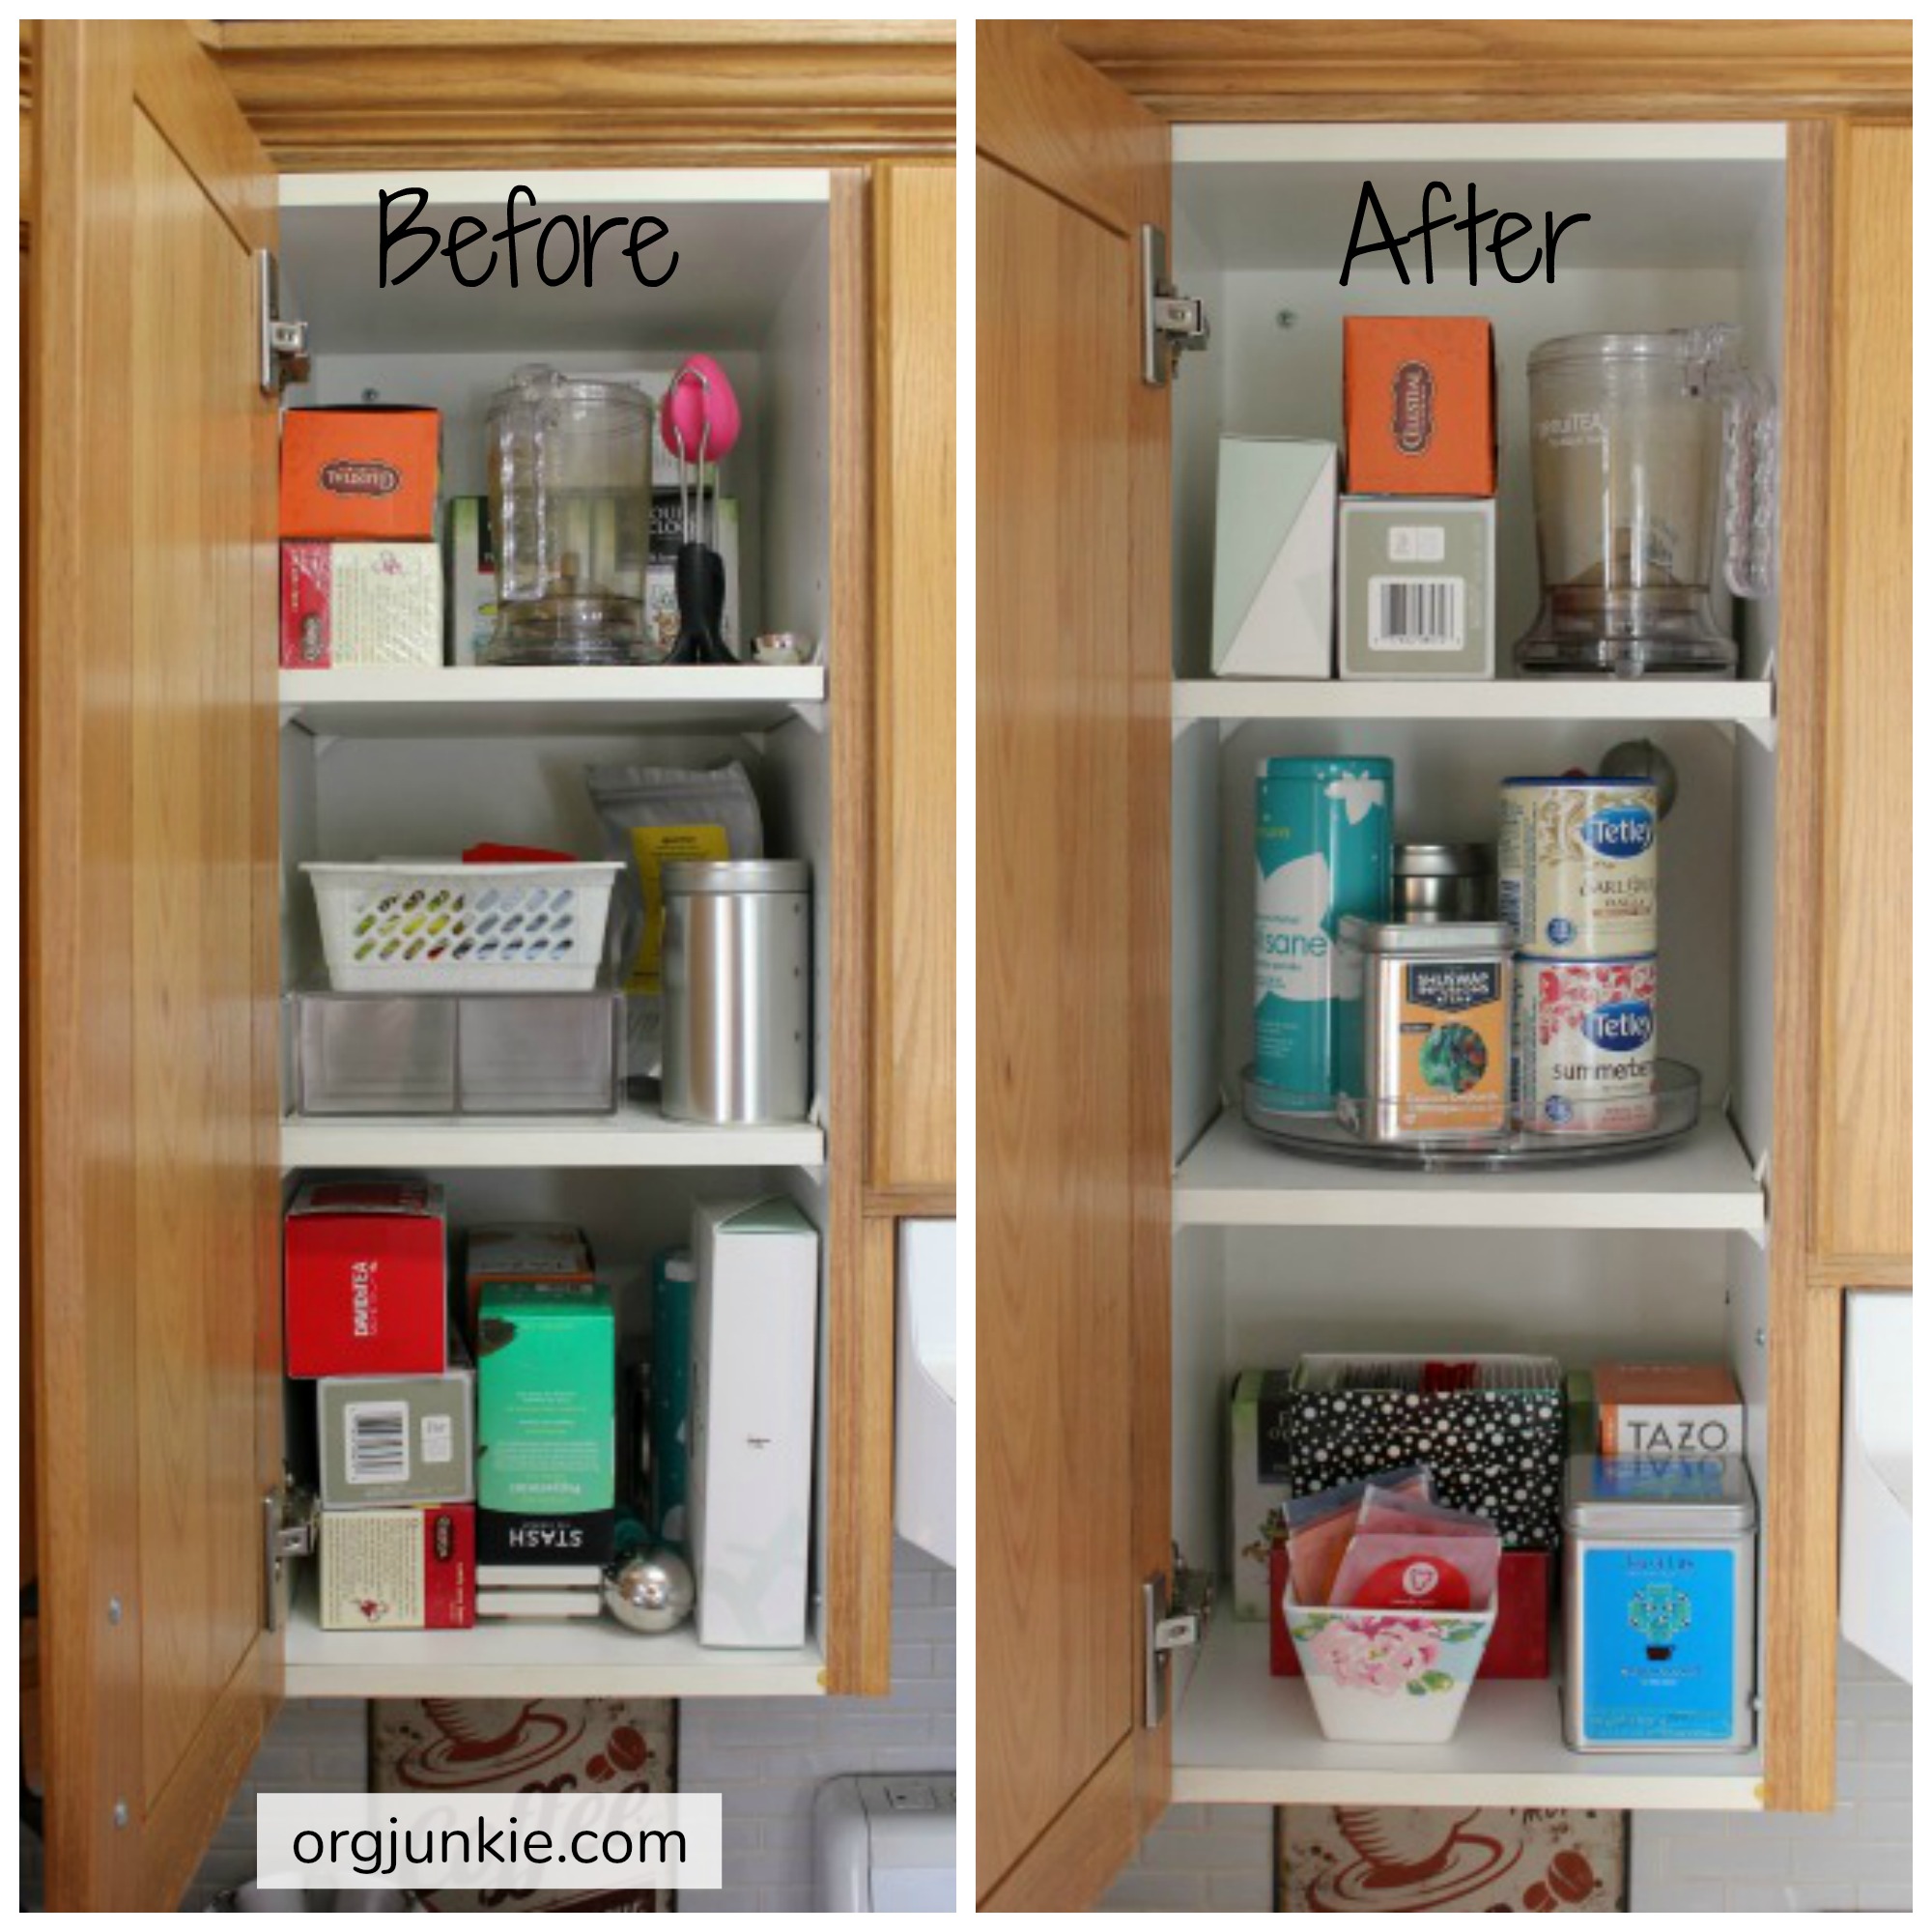 Small Organized Spaces: Tea Cabinet at I'm an Organizing Junkie. Function first always!